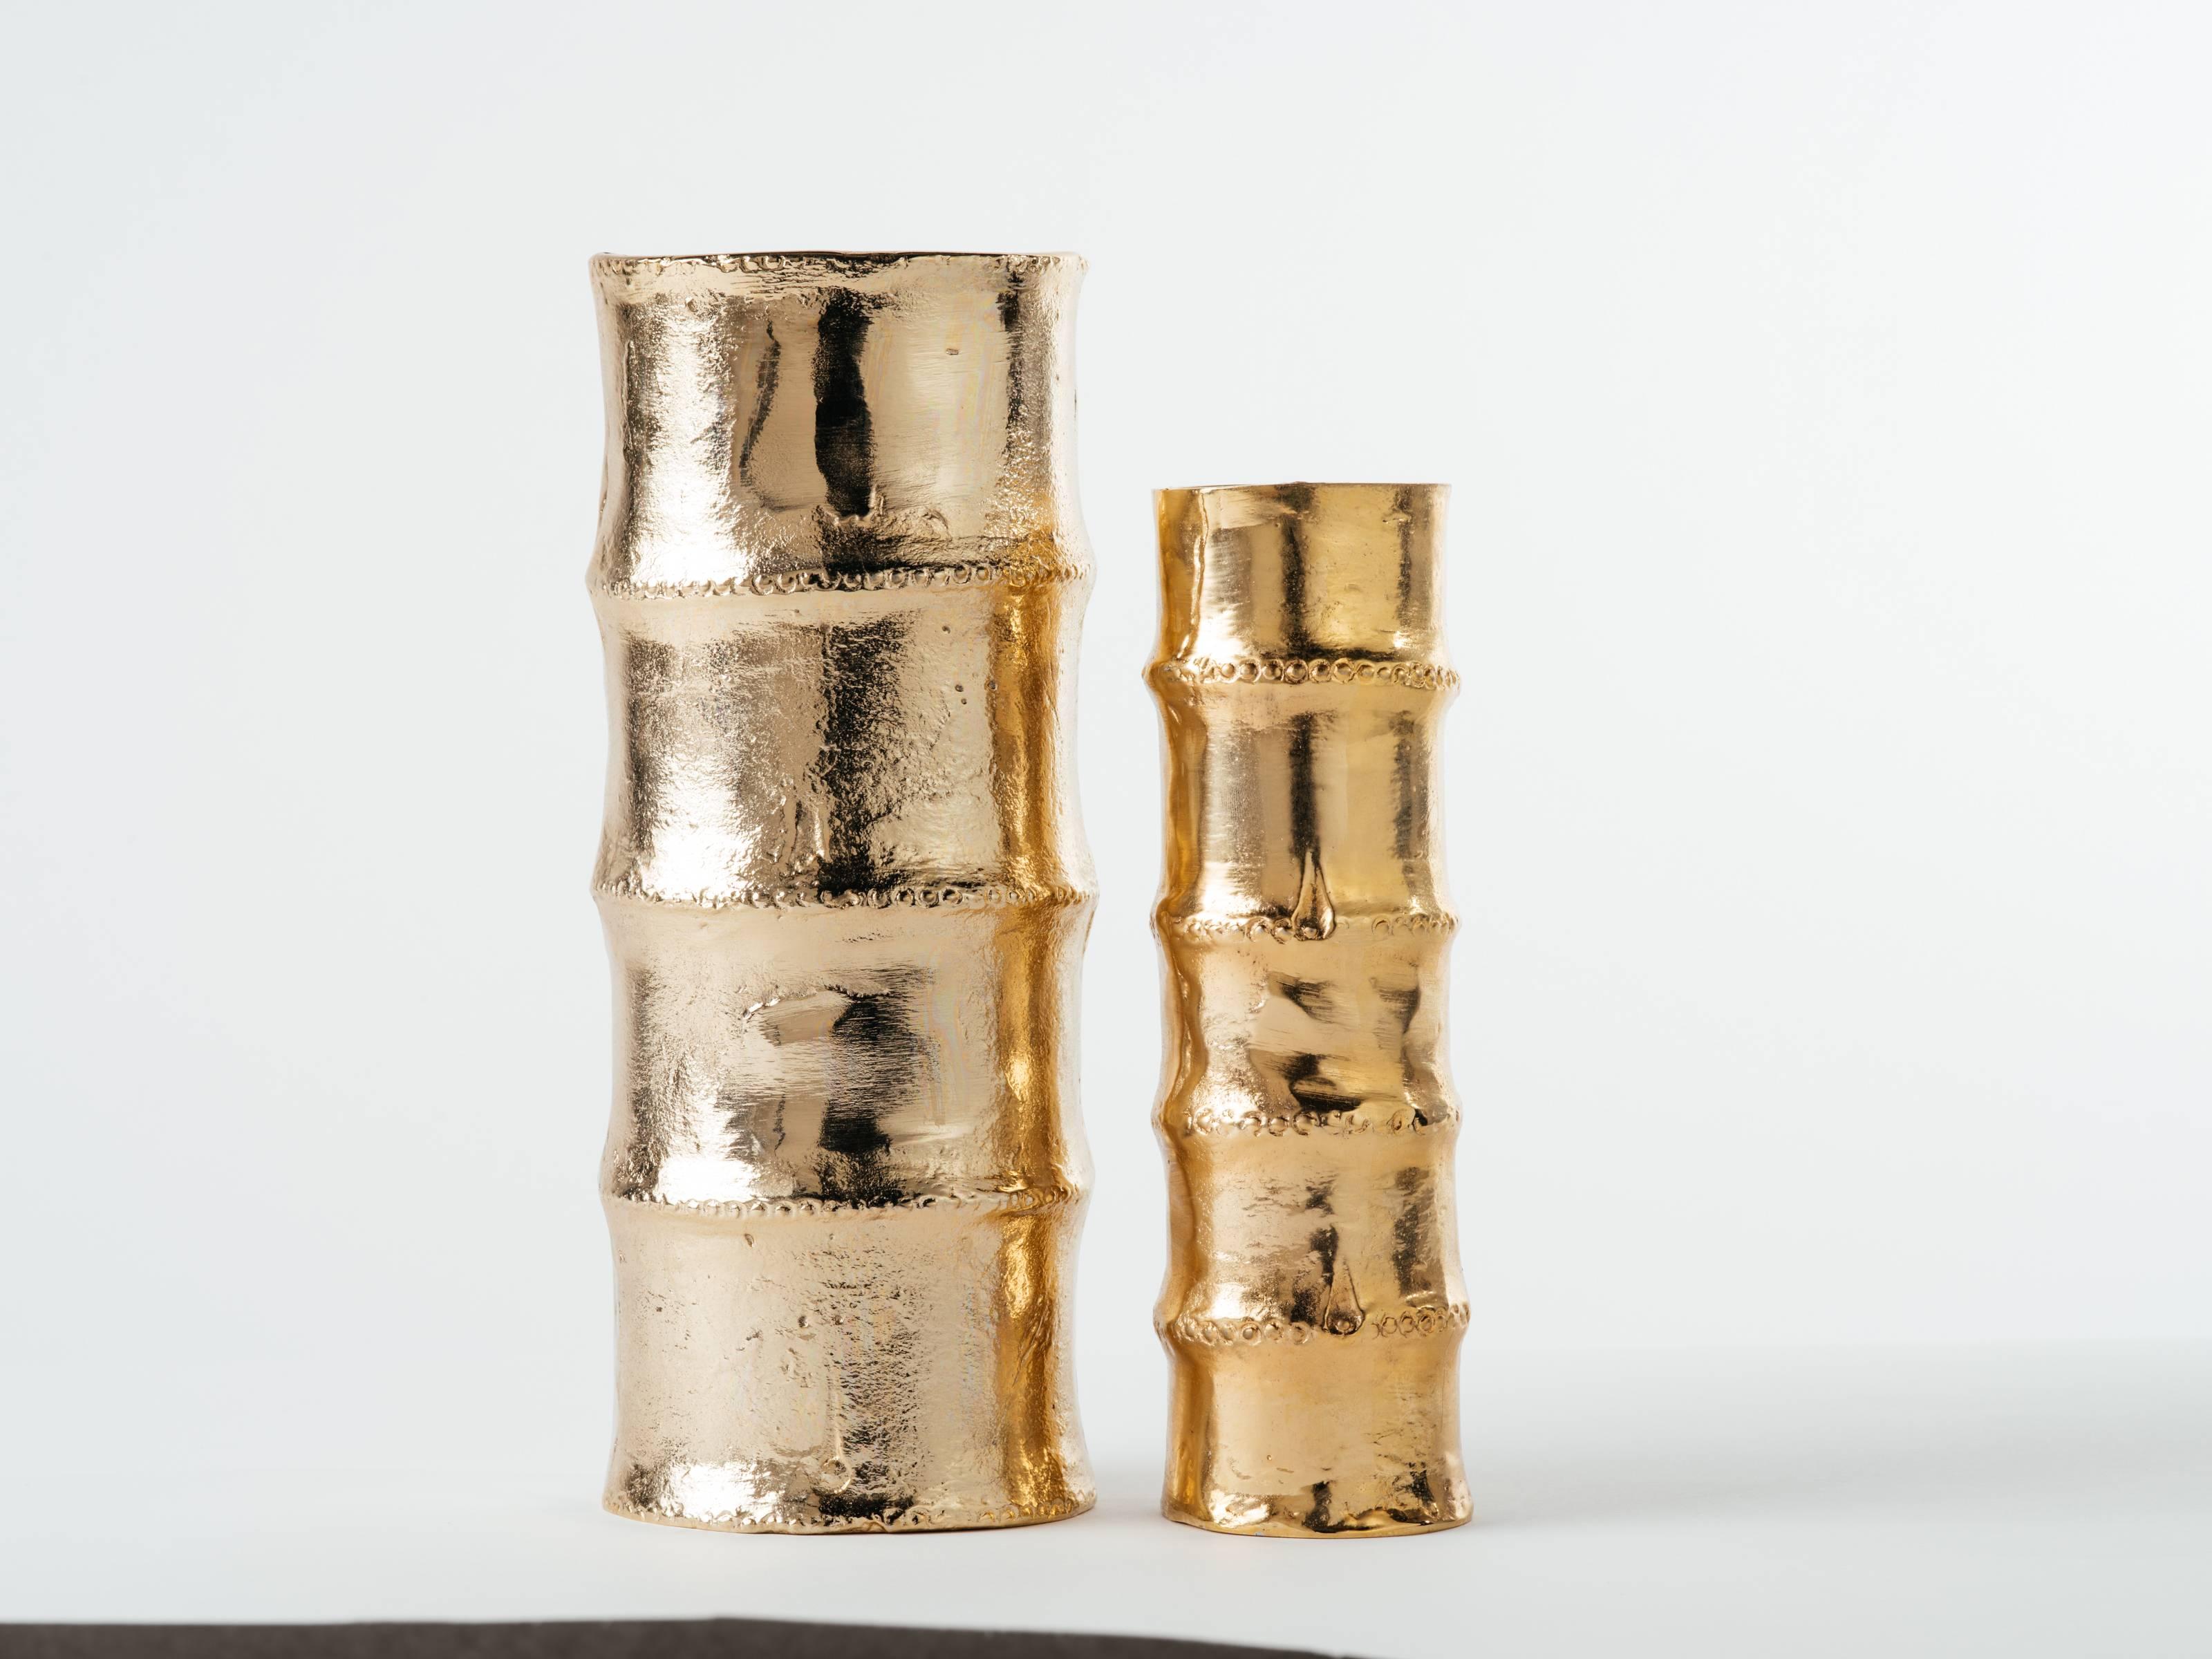 Exquisite pair of Mid-Century Modern style sand cast bamboo vases. 24-karat gold plating over metal alloy, or cast iron. Large vase measures 12